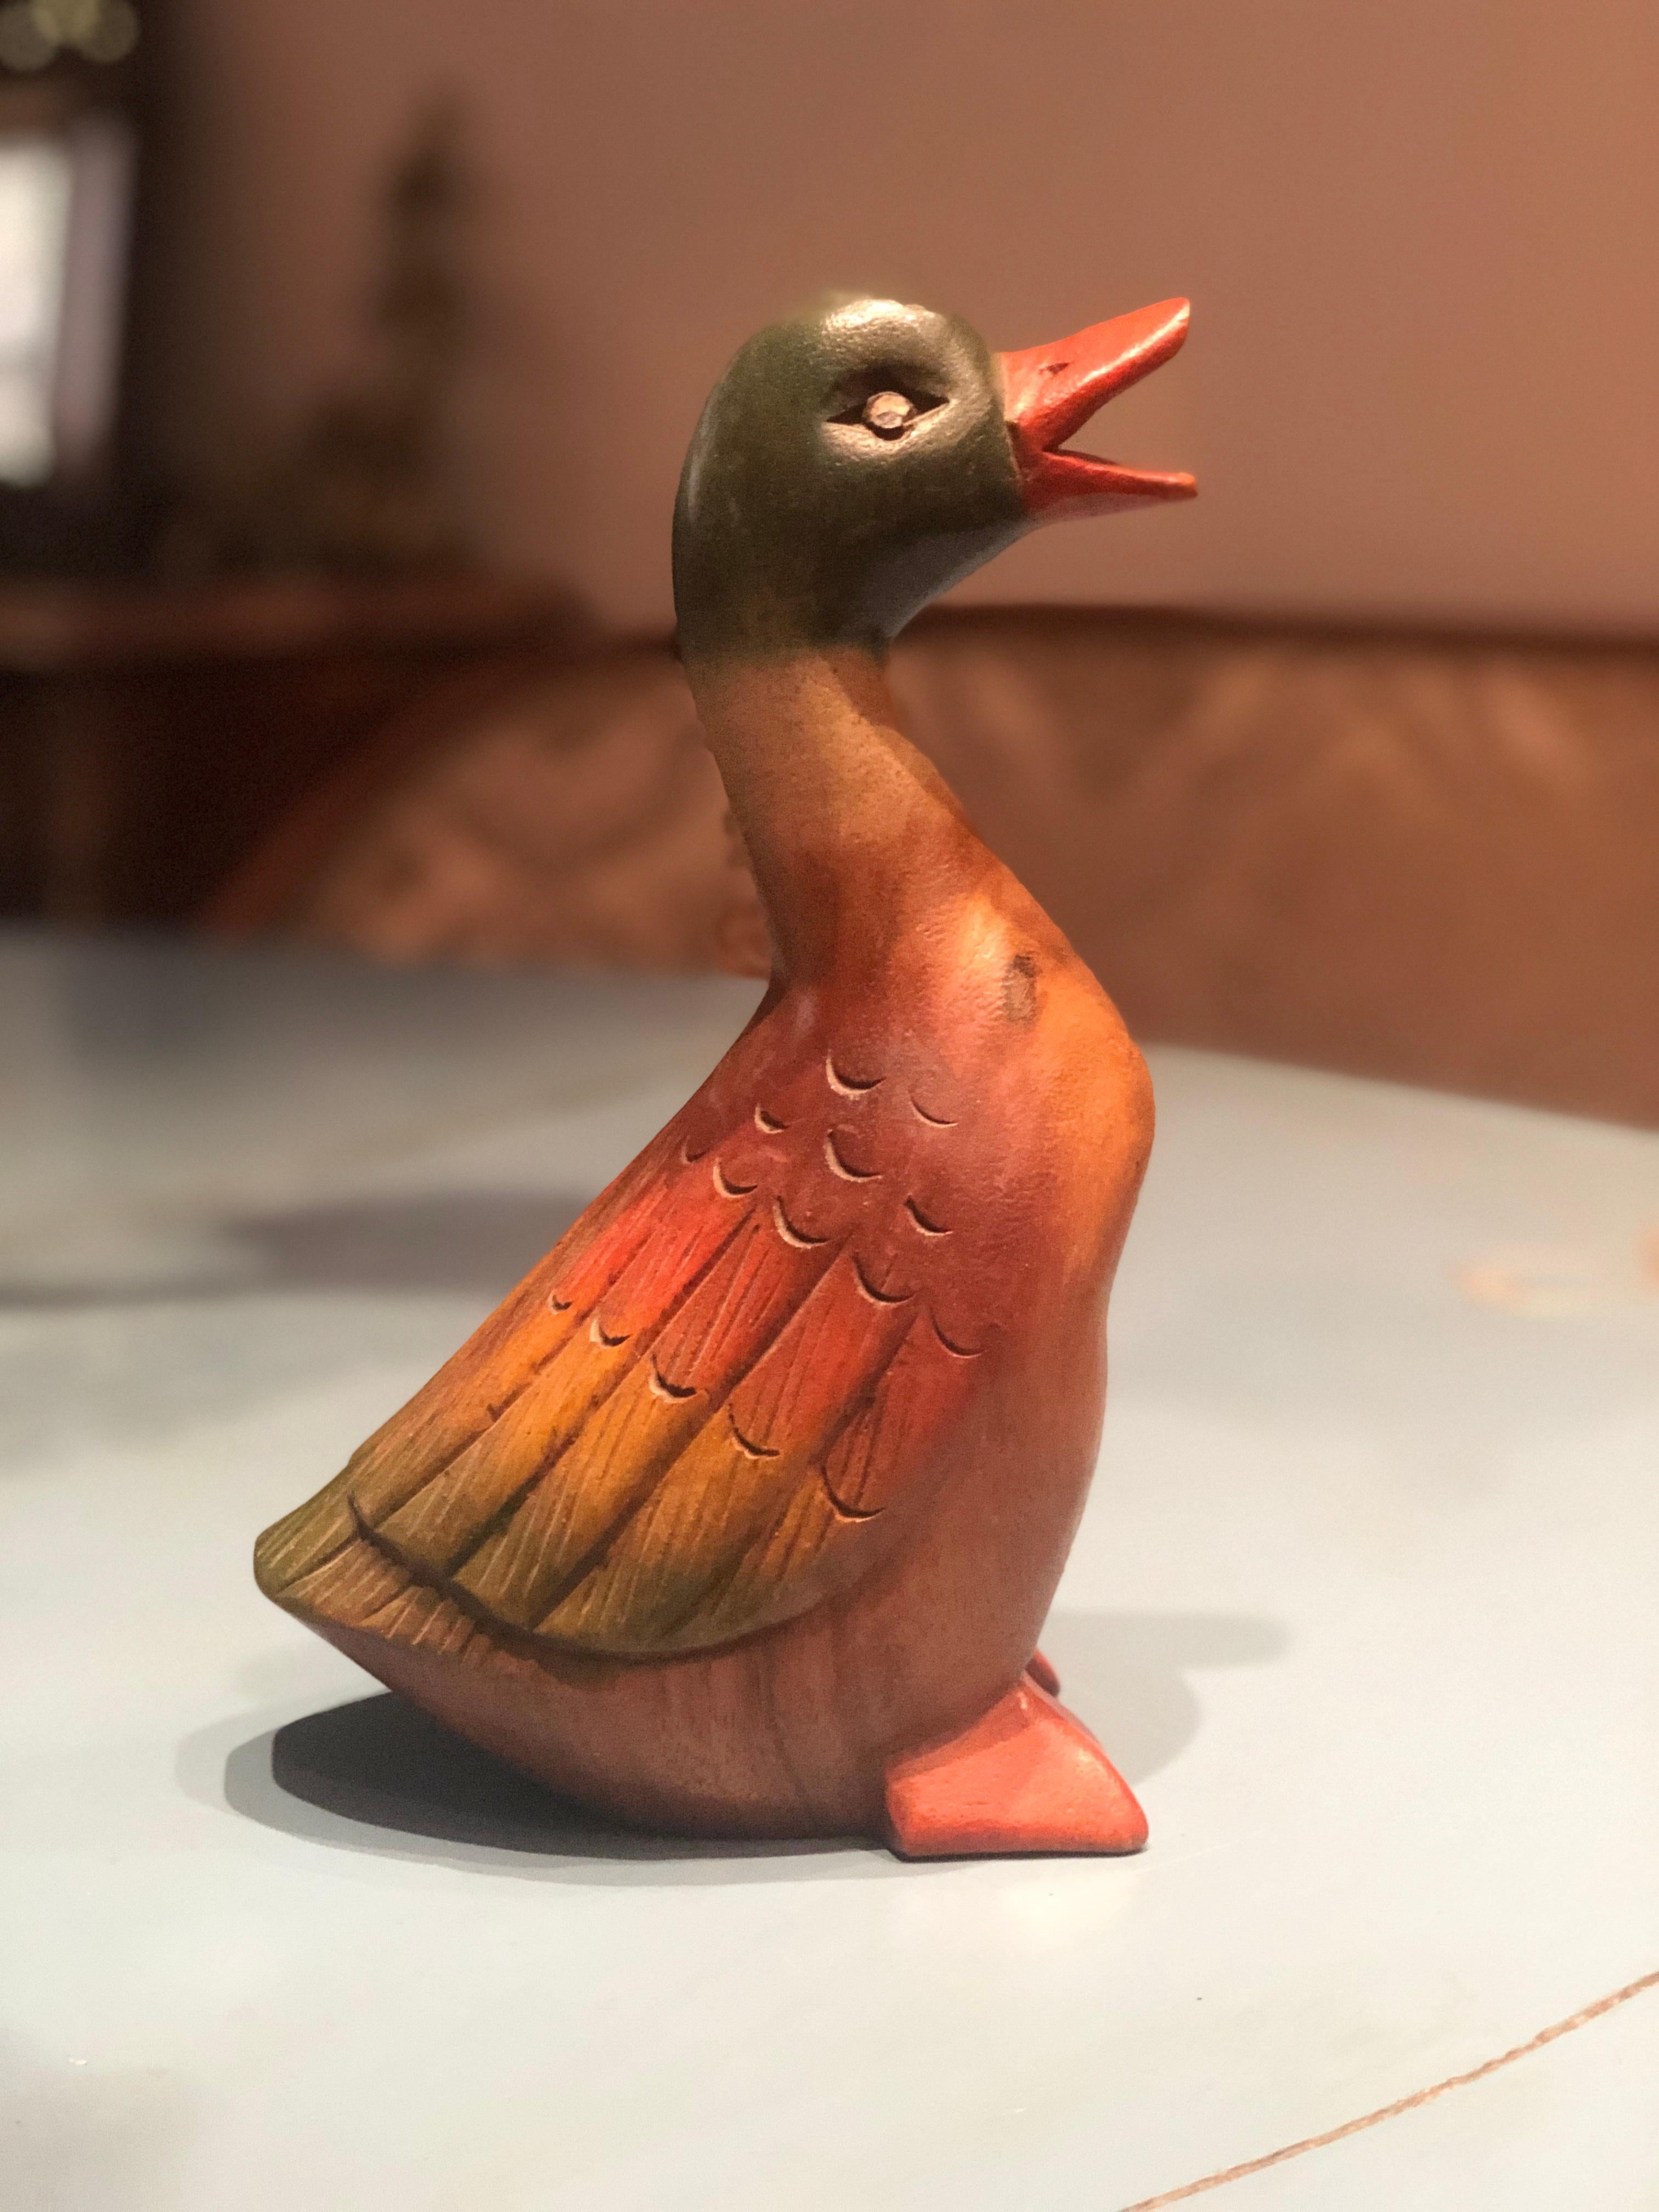 Handmade wooden duck painted in natural colors.
France, 20th century.